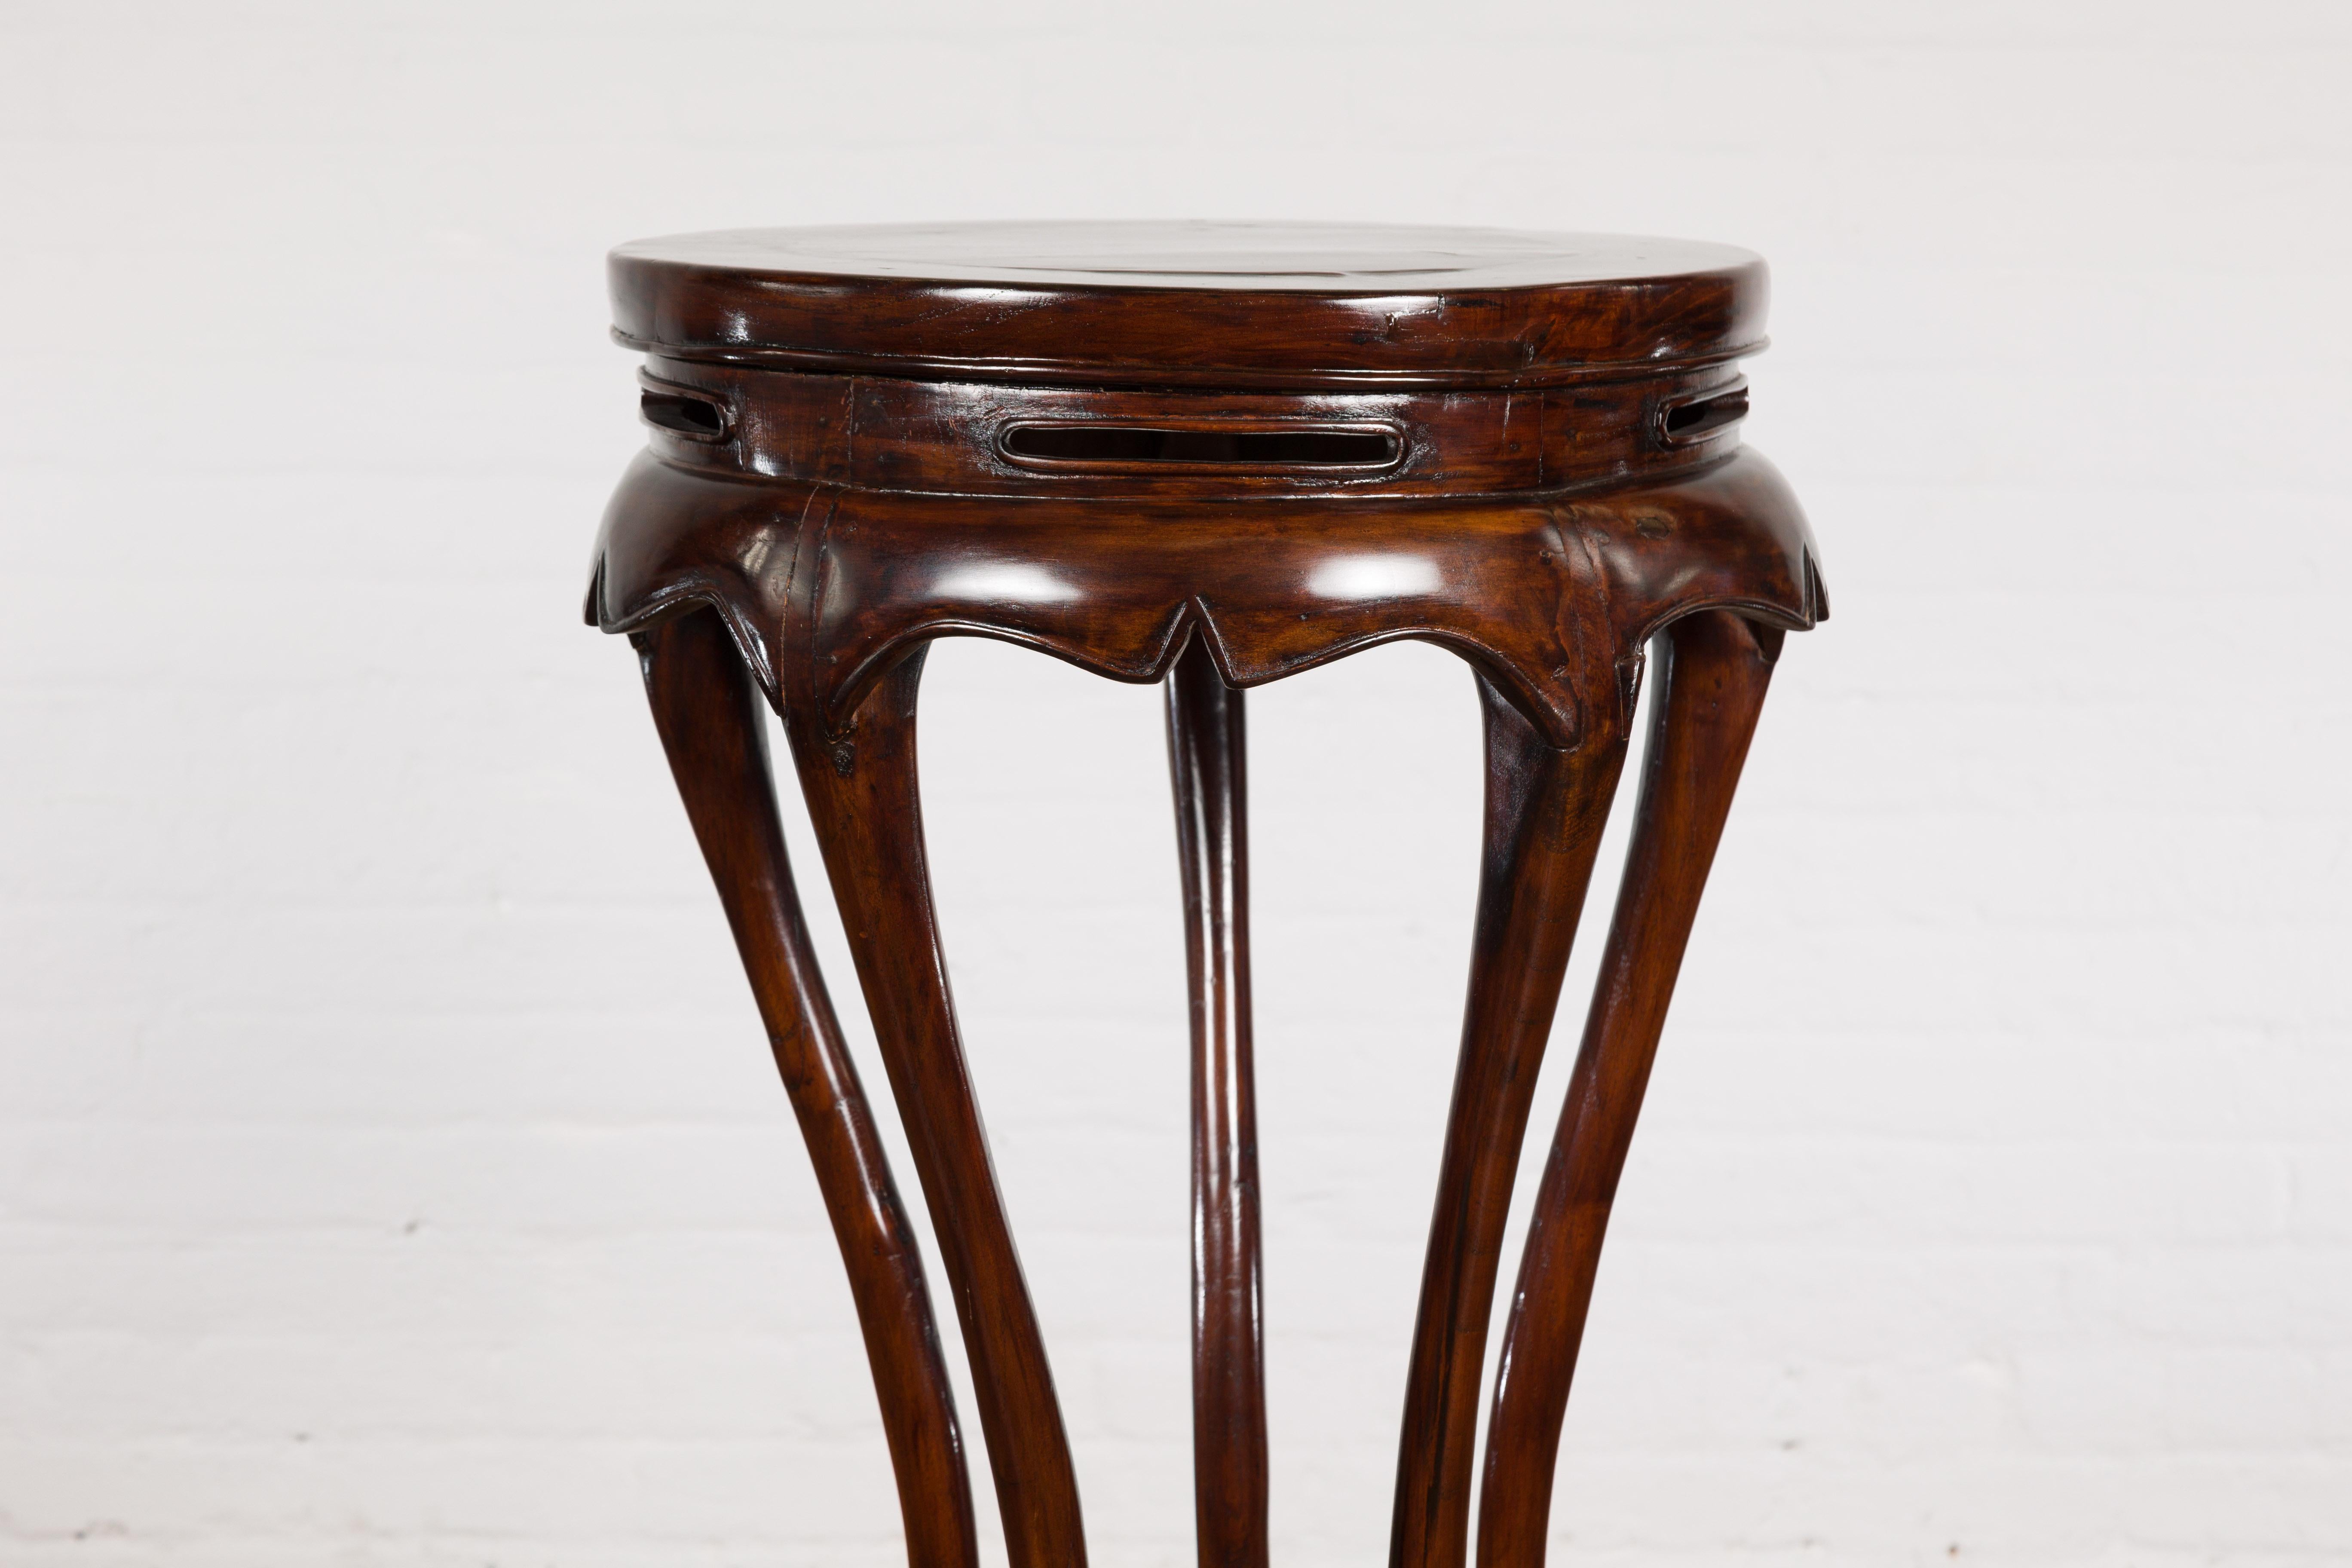 20th Century Chinese Late Qing Dynasty Plant Stand with Carved Apron and Curving Legs For Sale